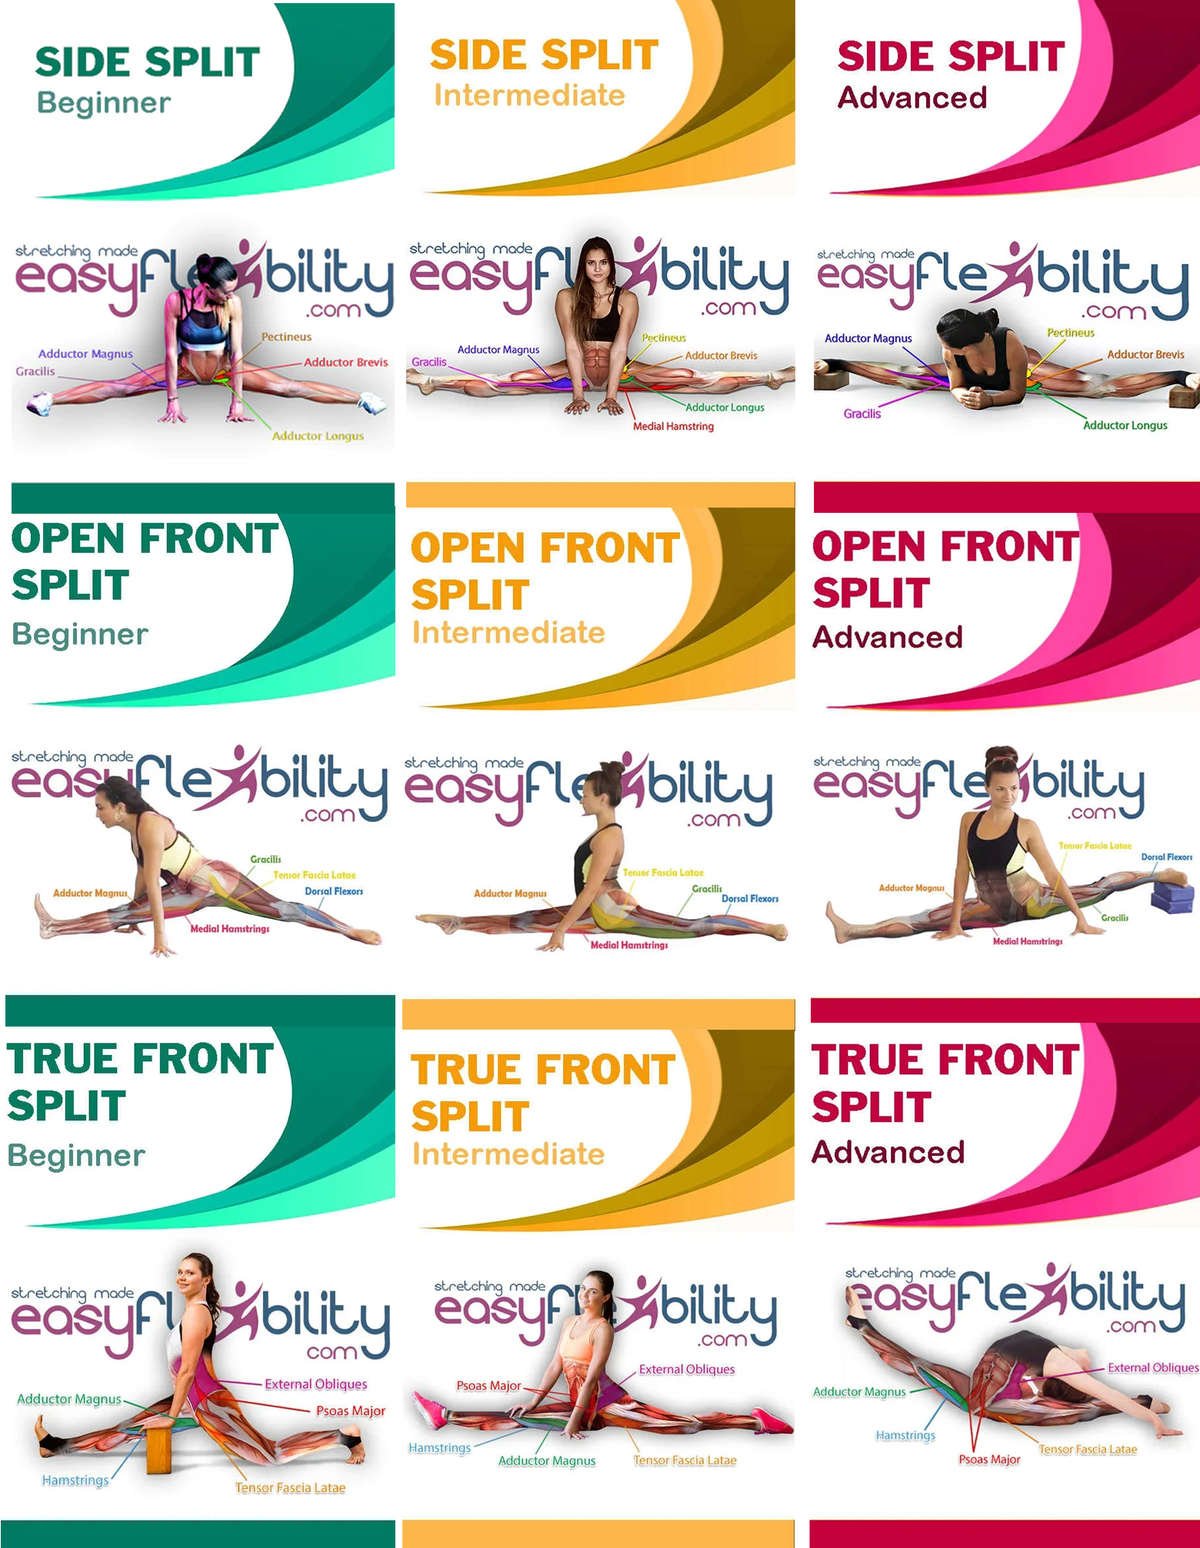 How to Do the Splits: Training Tips, Instructions, and Precautions